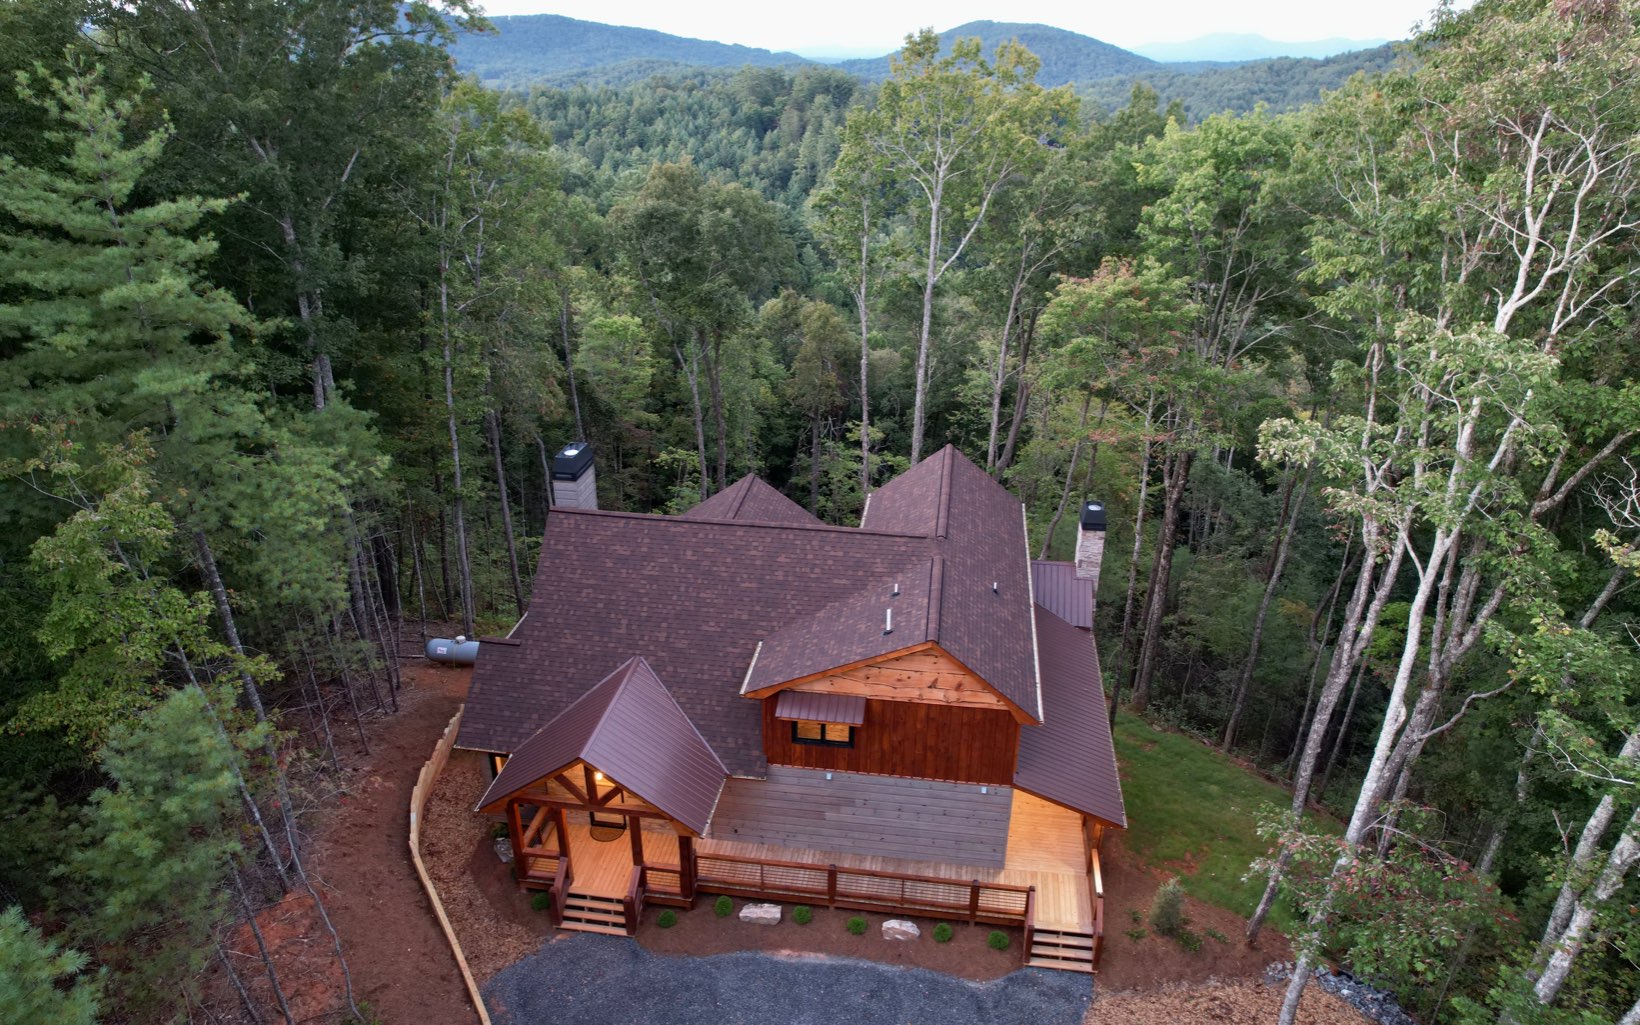 HUGE PRICE REDUCTION!!Investors take note! Stunning New Construction w/ panoramic mountain views and so much wow factor located just minutes from Downtown Blue Ridge! This 3BR/3.5 bath, 3,385 sq ft modern rustic home offers total privacy, 3 fireplaces, a master on all 3 levels, high end finishes throughout & is located in one of the most sought after areas surrounded by USFS. Walk in the door to soaring cathedral ceilings & a wall of windows showcasing the pristine mtn views! The kitchen features an open concept w/ top of the line appliances, butlers pantry & an oversized island next to the dining area. The huge living room w/ floor to ceiling stacked stone fireplace provides plenty of room for guests! Large master on main w/ beautiful bathroom and large closet. Go upstairs to an oversized master w/ private porch, full bath & an open loft area perfect for a home office or additional sleeping space. Meander downstairs to the terrace level featuring a huge game room w/ wet bar, separate living area w/ stacked stone fireplace and additional master bedroom. Wrap around porch w/ outdoor fireplace is the perfect spot the take in the beautiful scenery and to entertain guests! No detail has been overlooked and you have to see this one to fully appreciate all that it has to offer. Whether you are looking for an optimal STR or the perfect family getaway, this is one you can't afford to miss! Additional acreage available for increased privacy or option to build family compound.